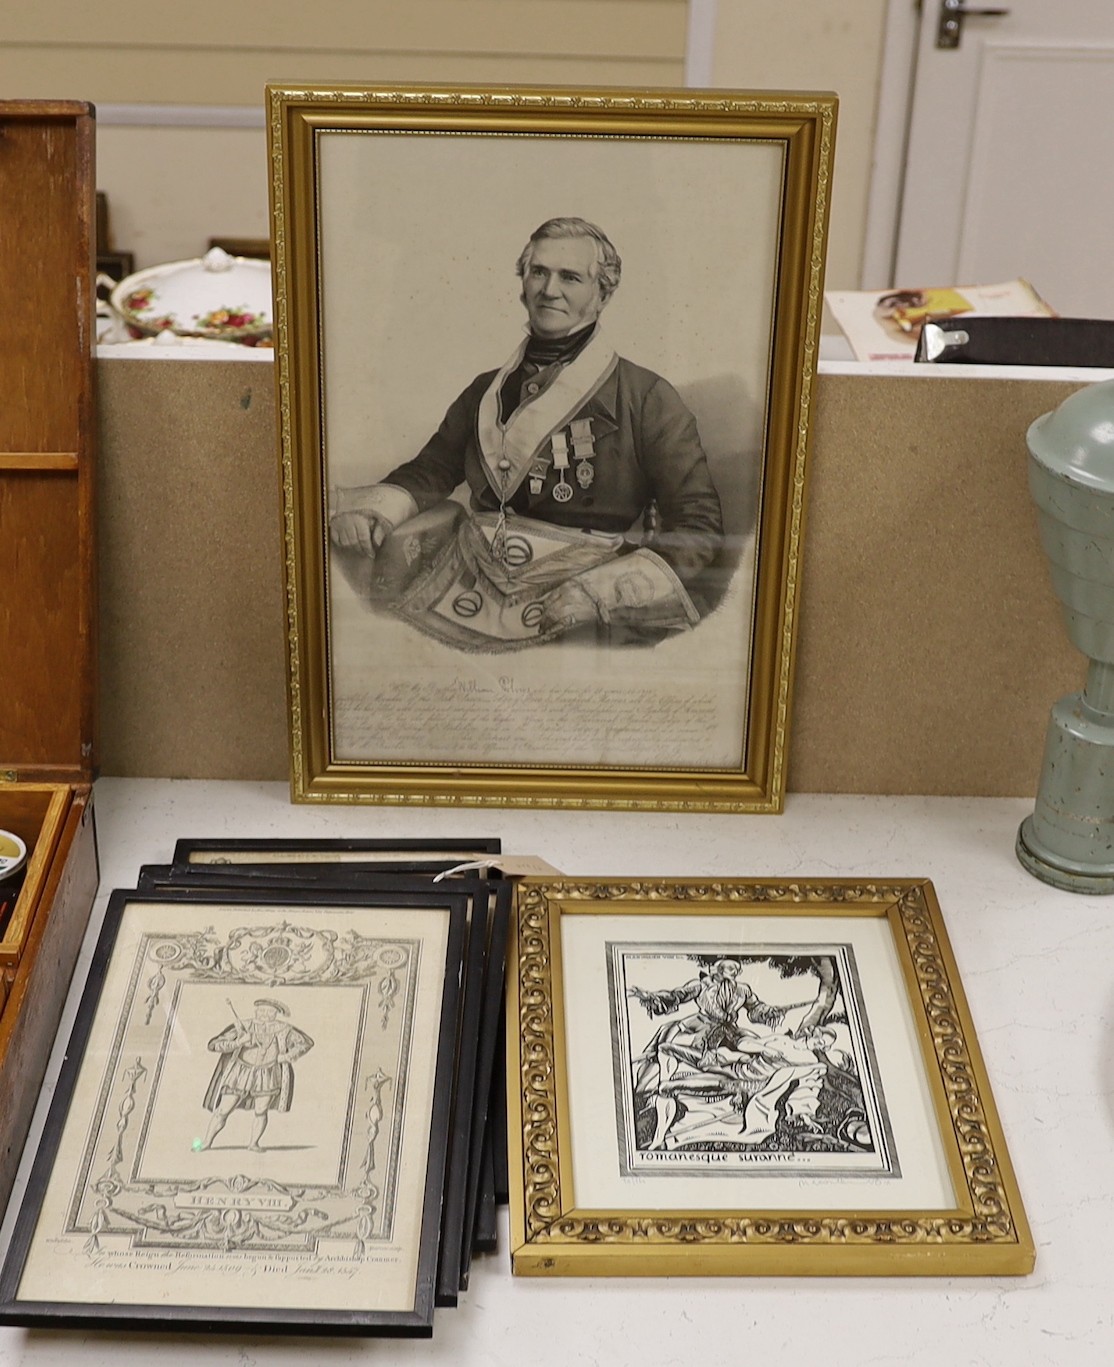 Hawkins after Wale, five engravings from Barnard's History of England, 34 x 20cm, Maximilien Vox (1894-1974), a woodblock print, Wayfare at Resting, 17 x 23cm, and a Masonic portrait of William Plows                     